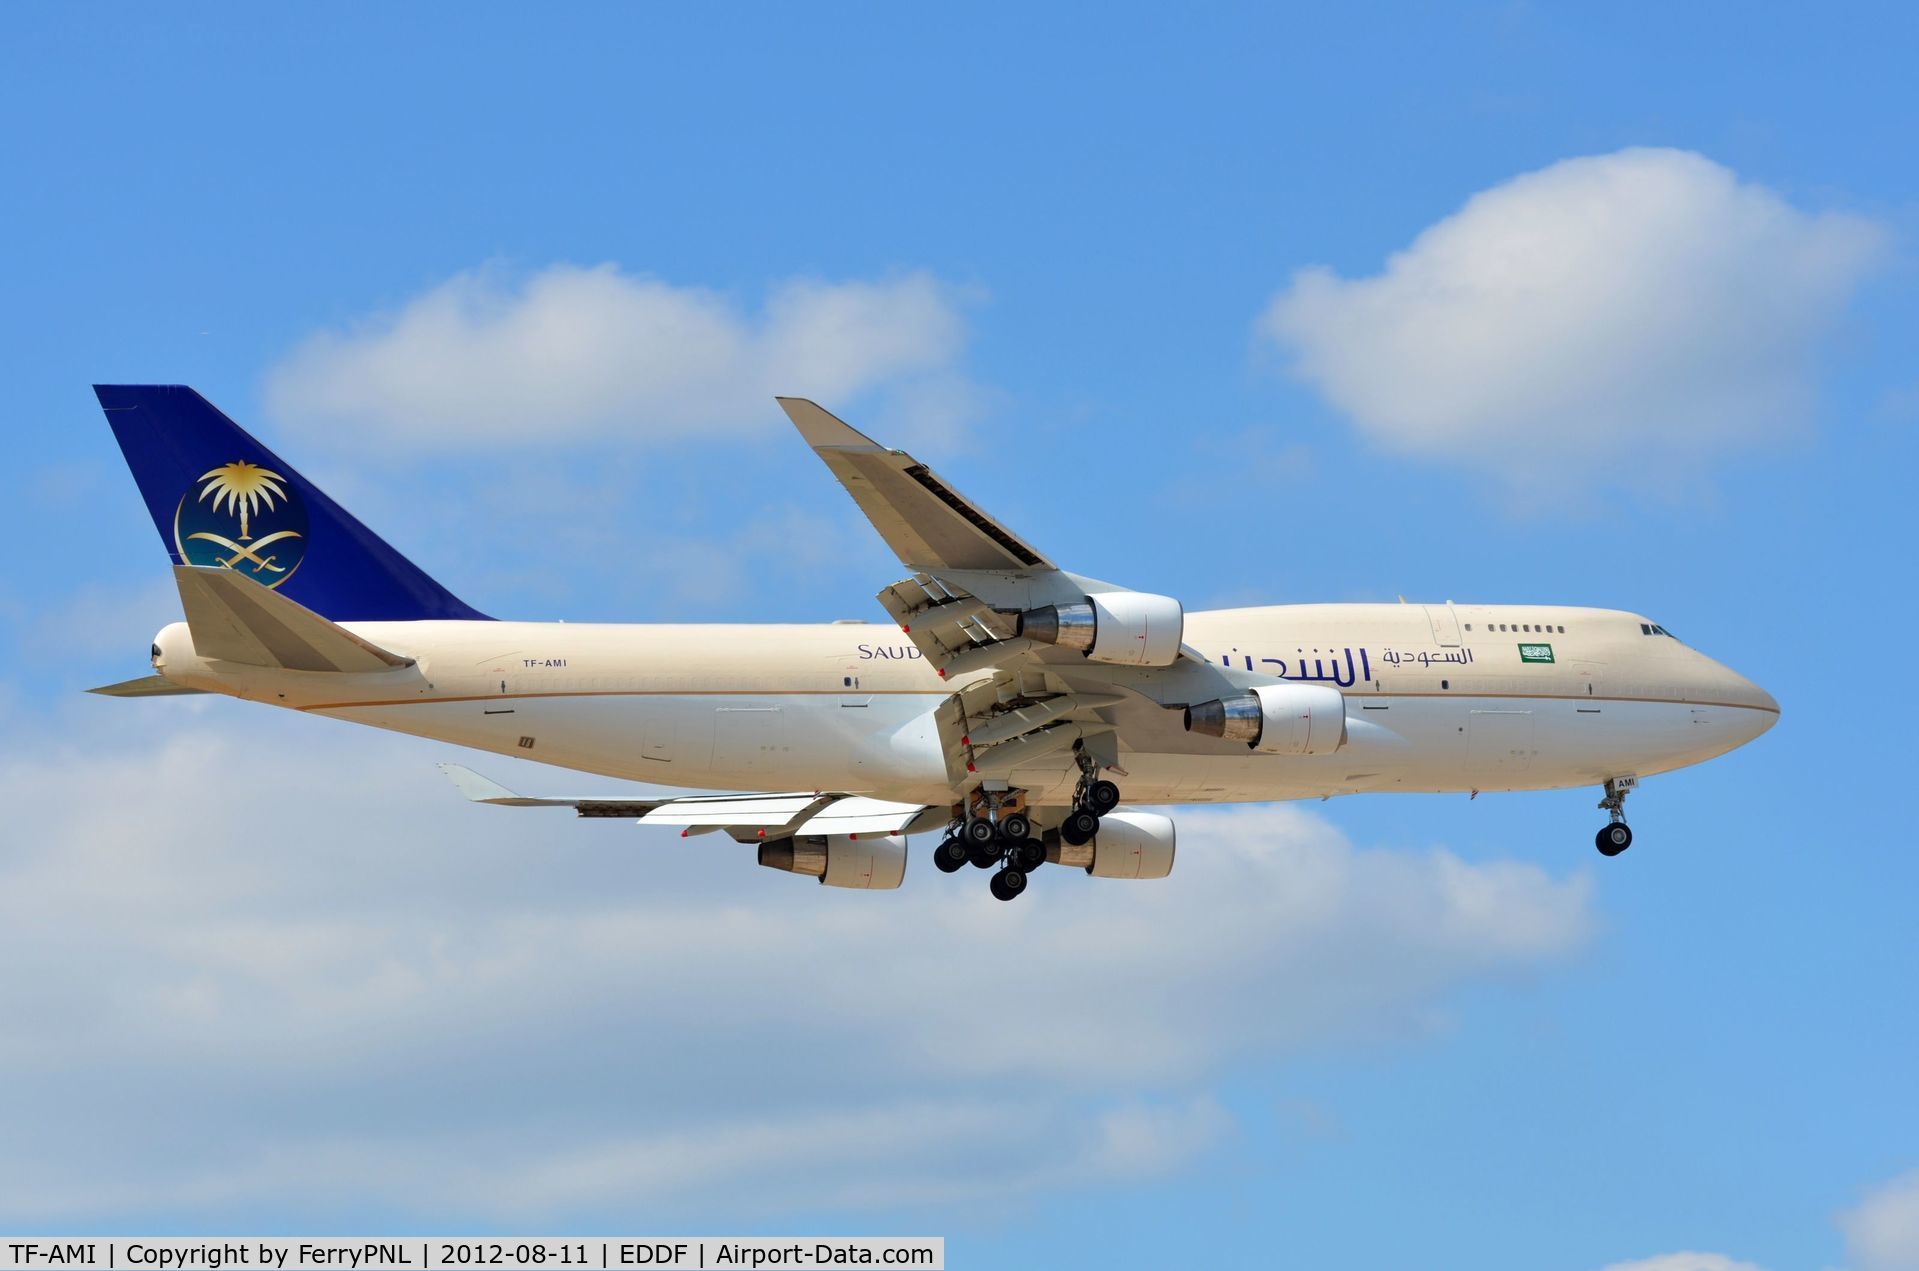 TF-AMI, 1992 Boeing 747-412 C/N 27066, Ex Singapore a/l B744 now operating in Saudia colours and converted to a freighter